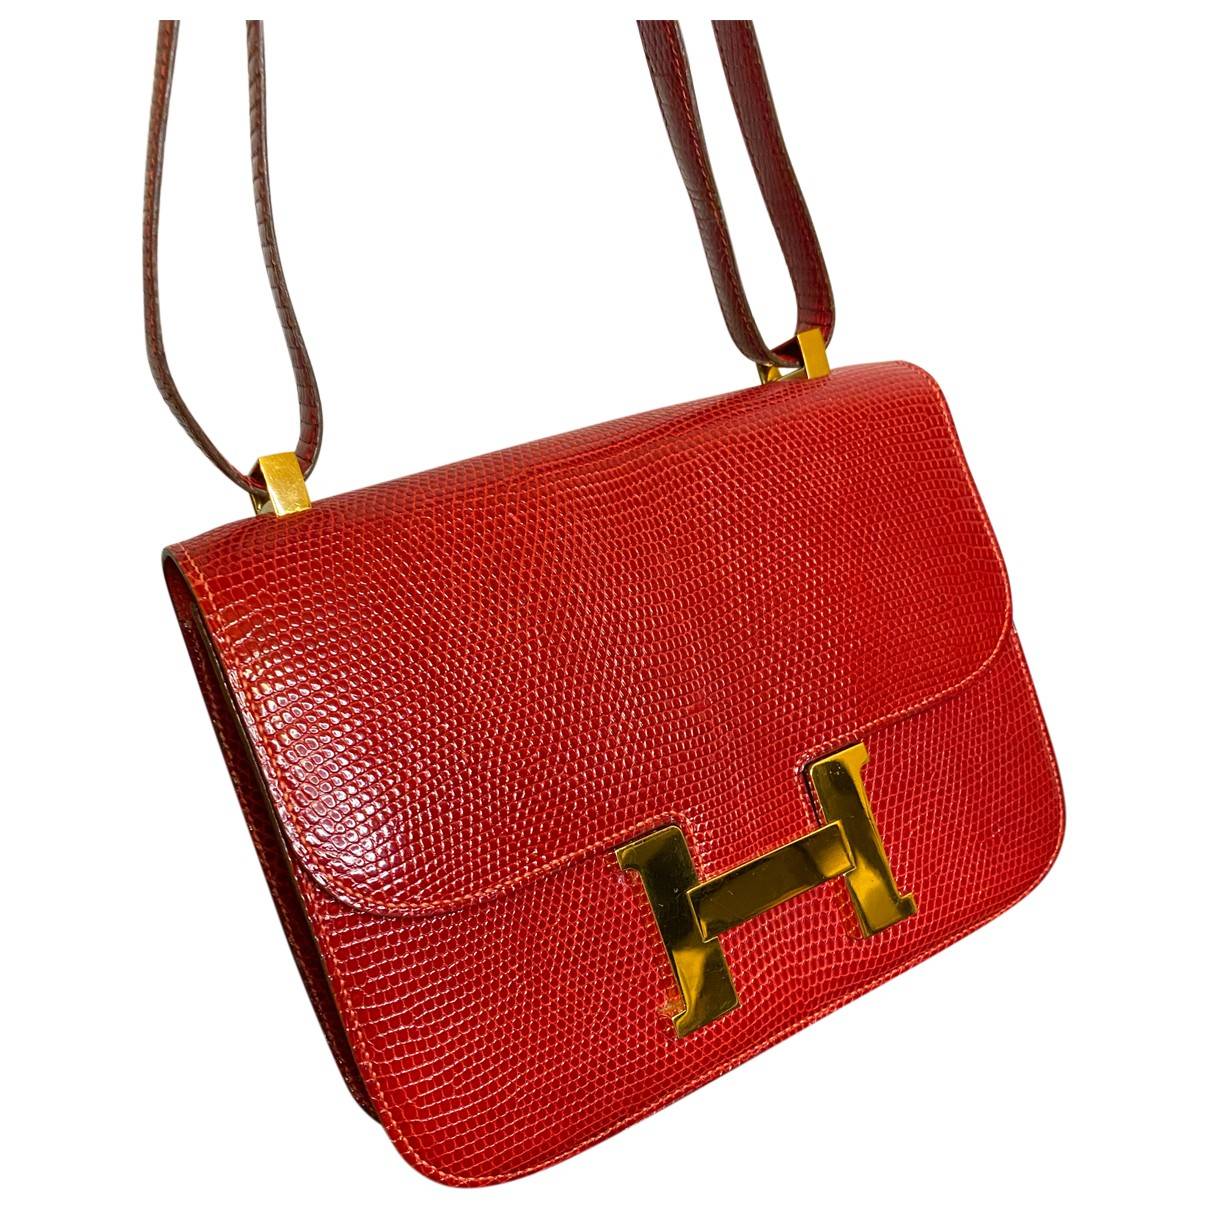 hermes constance red